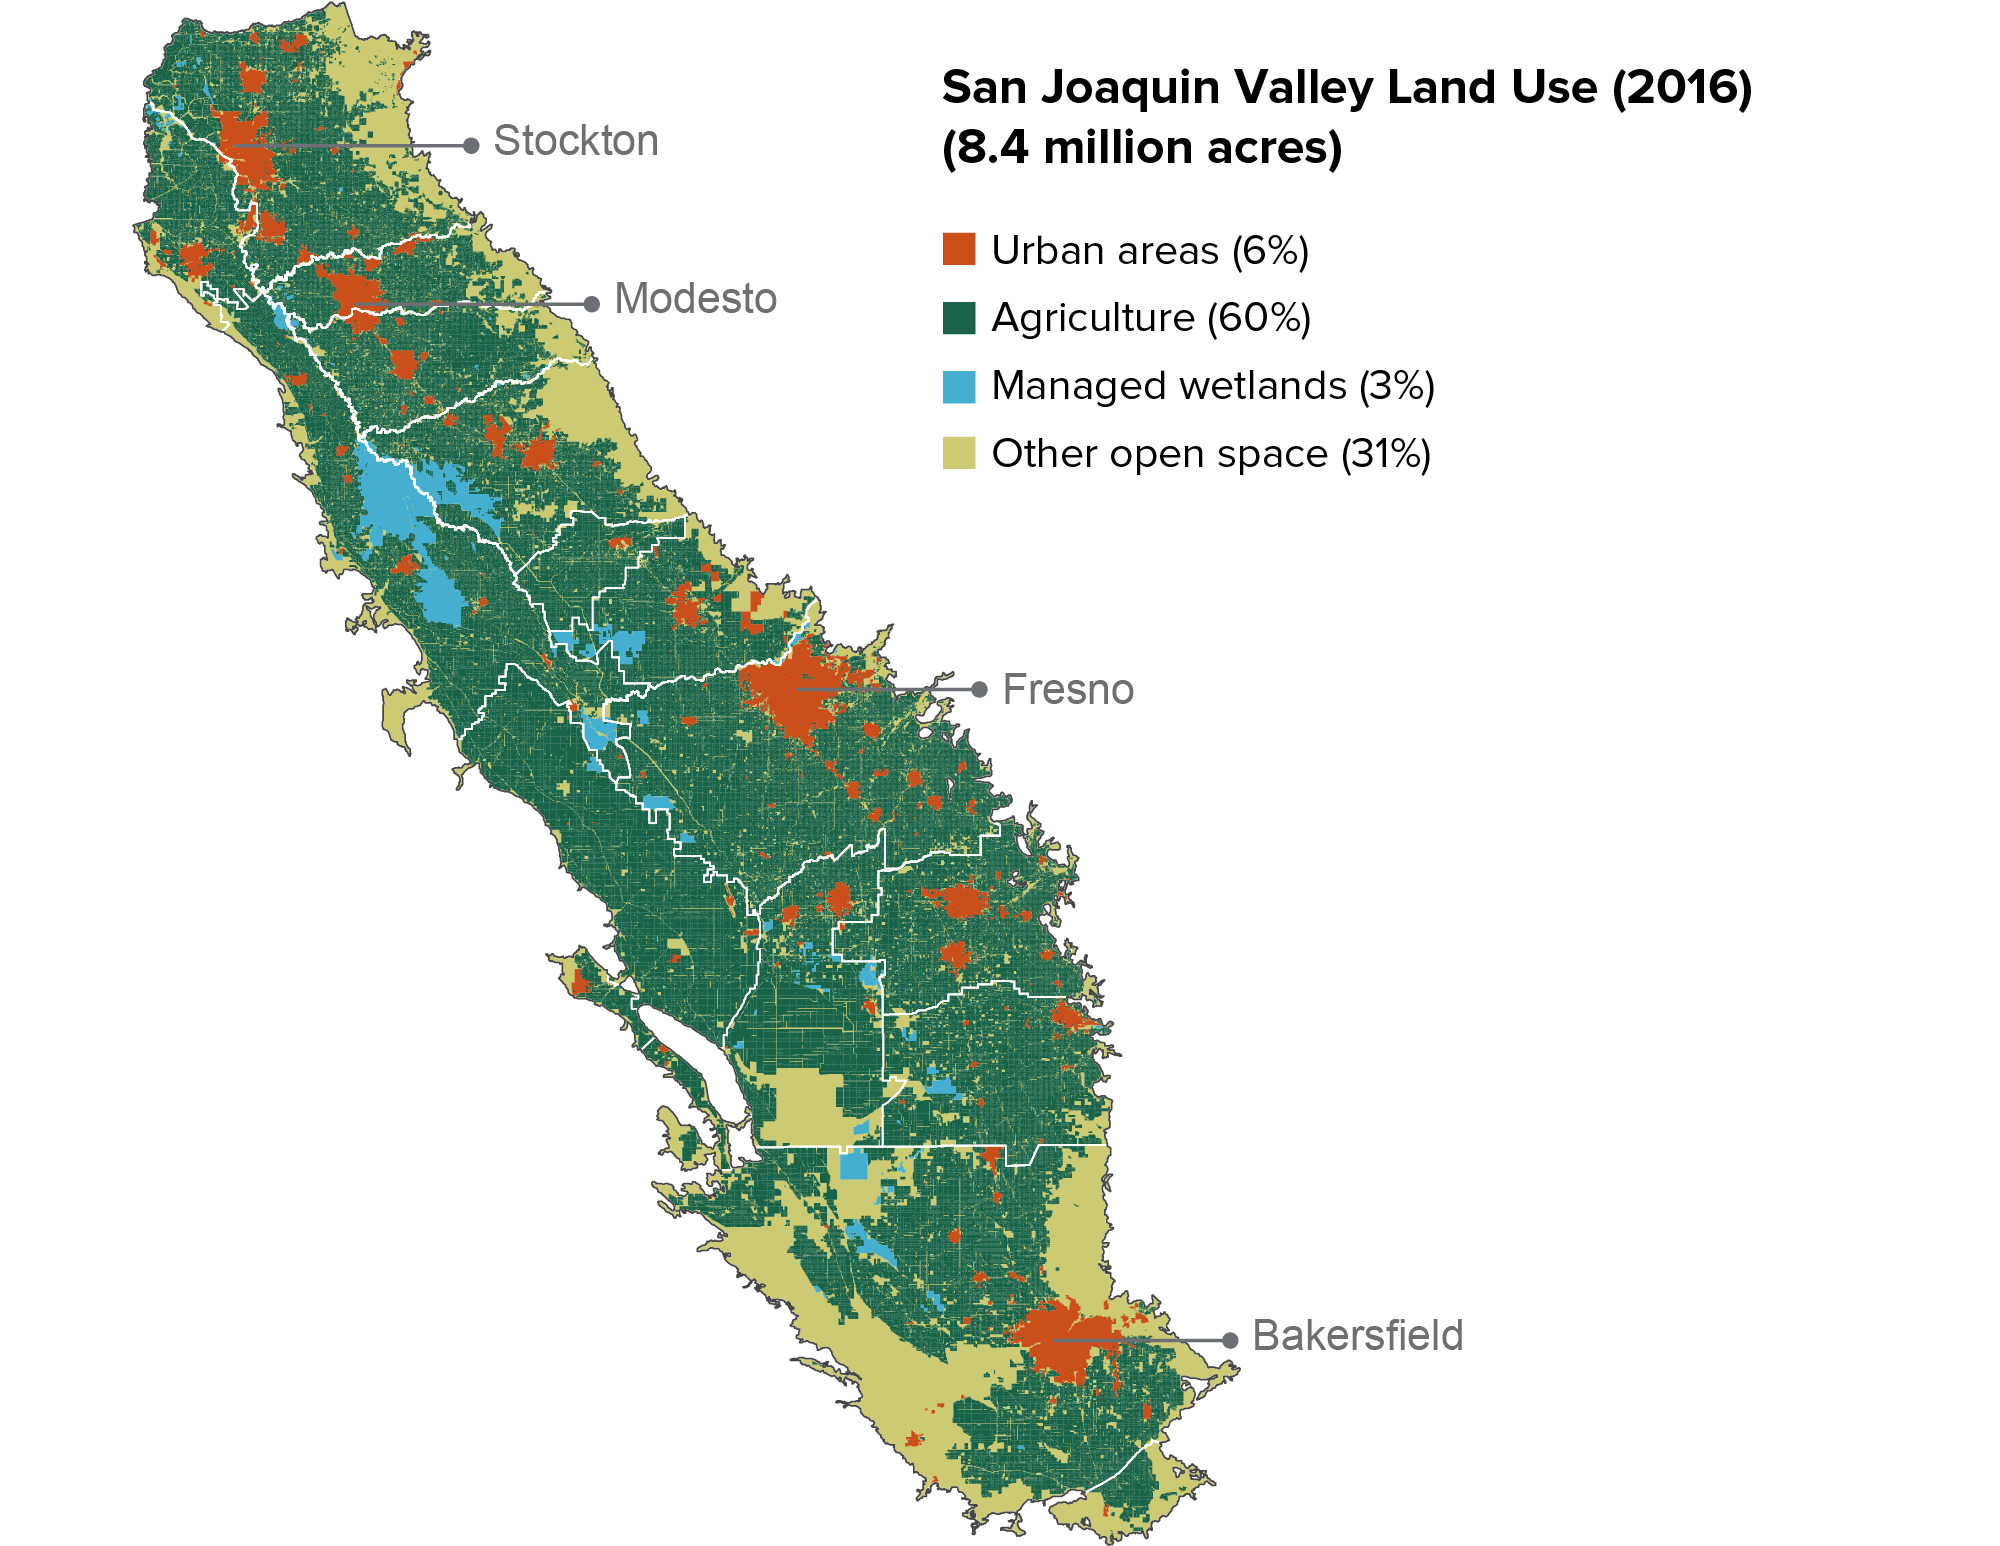 figure - The San Joaquin Valleys urban centers are surrounded by farmland